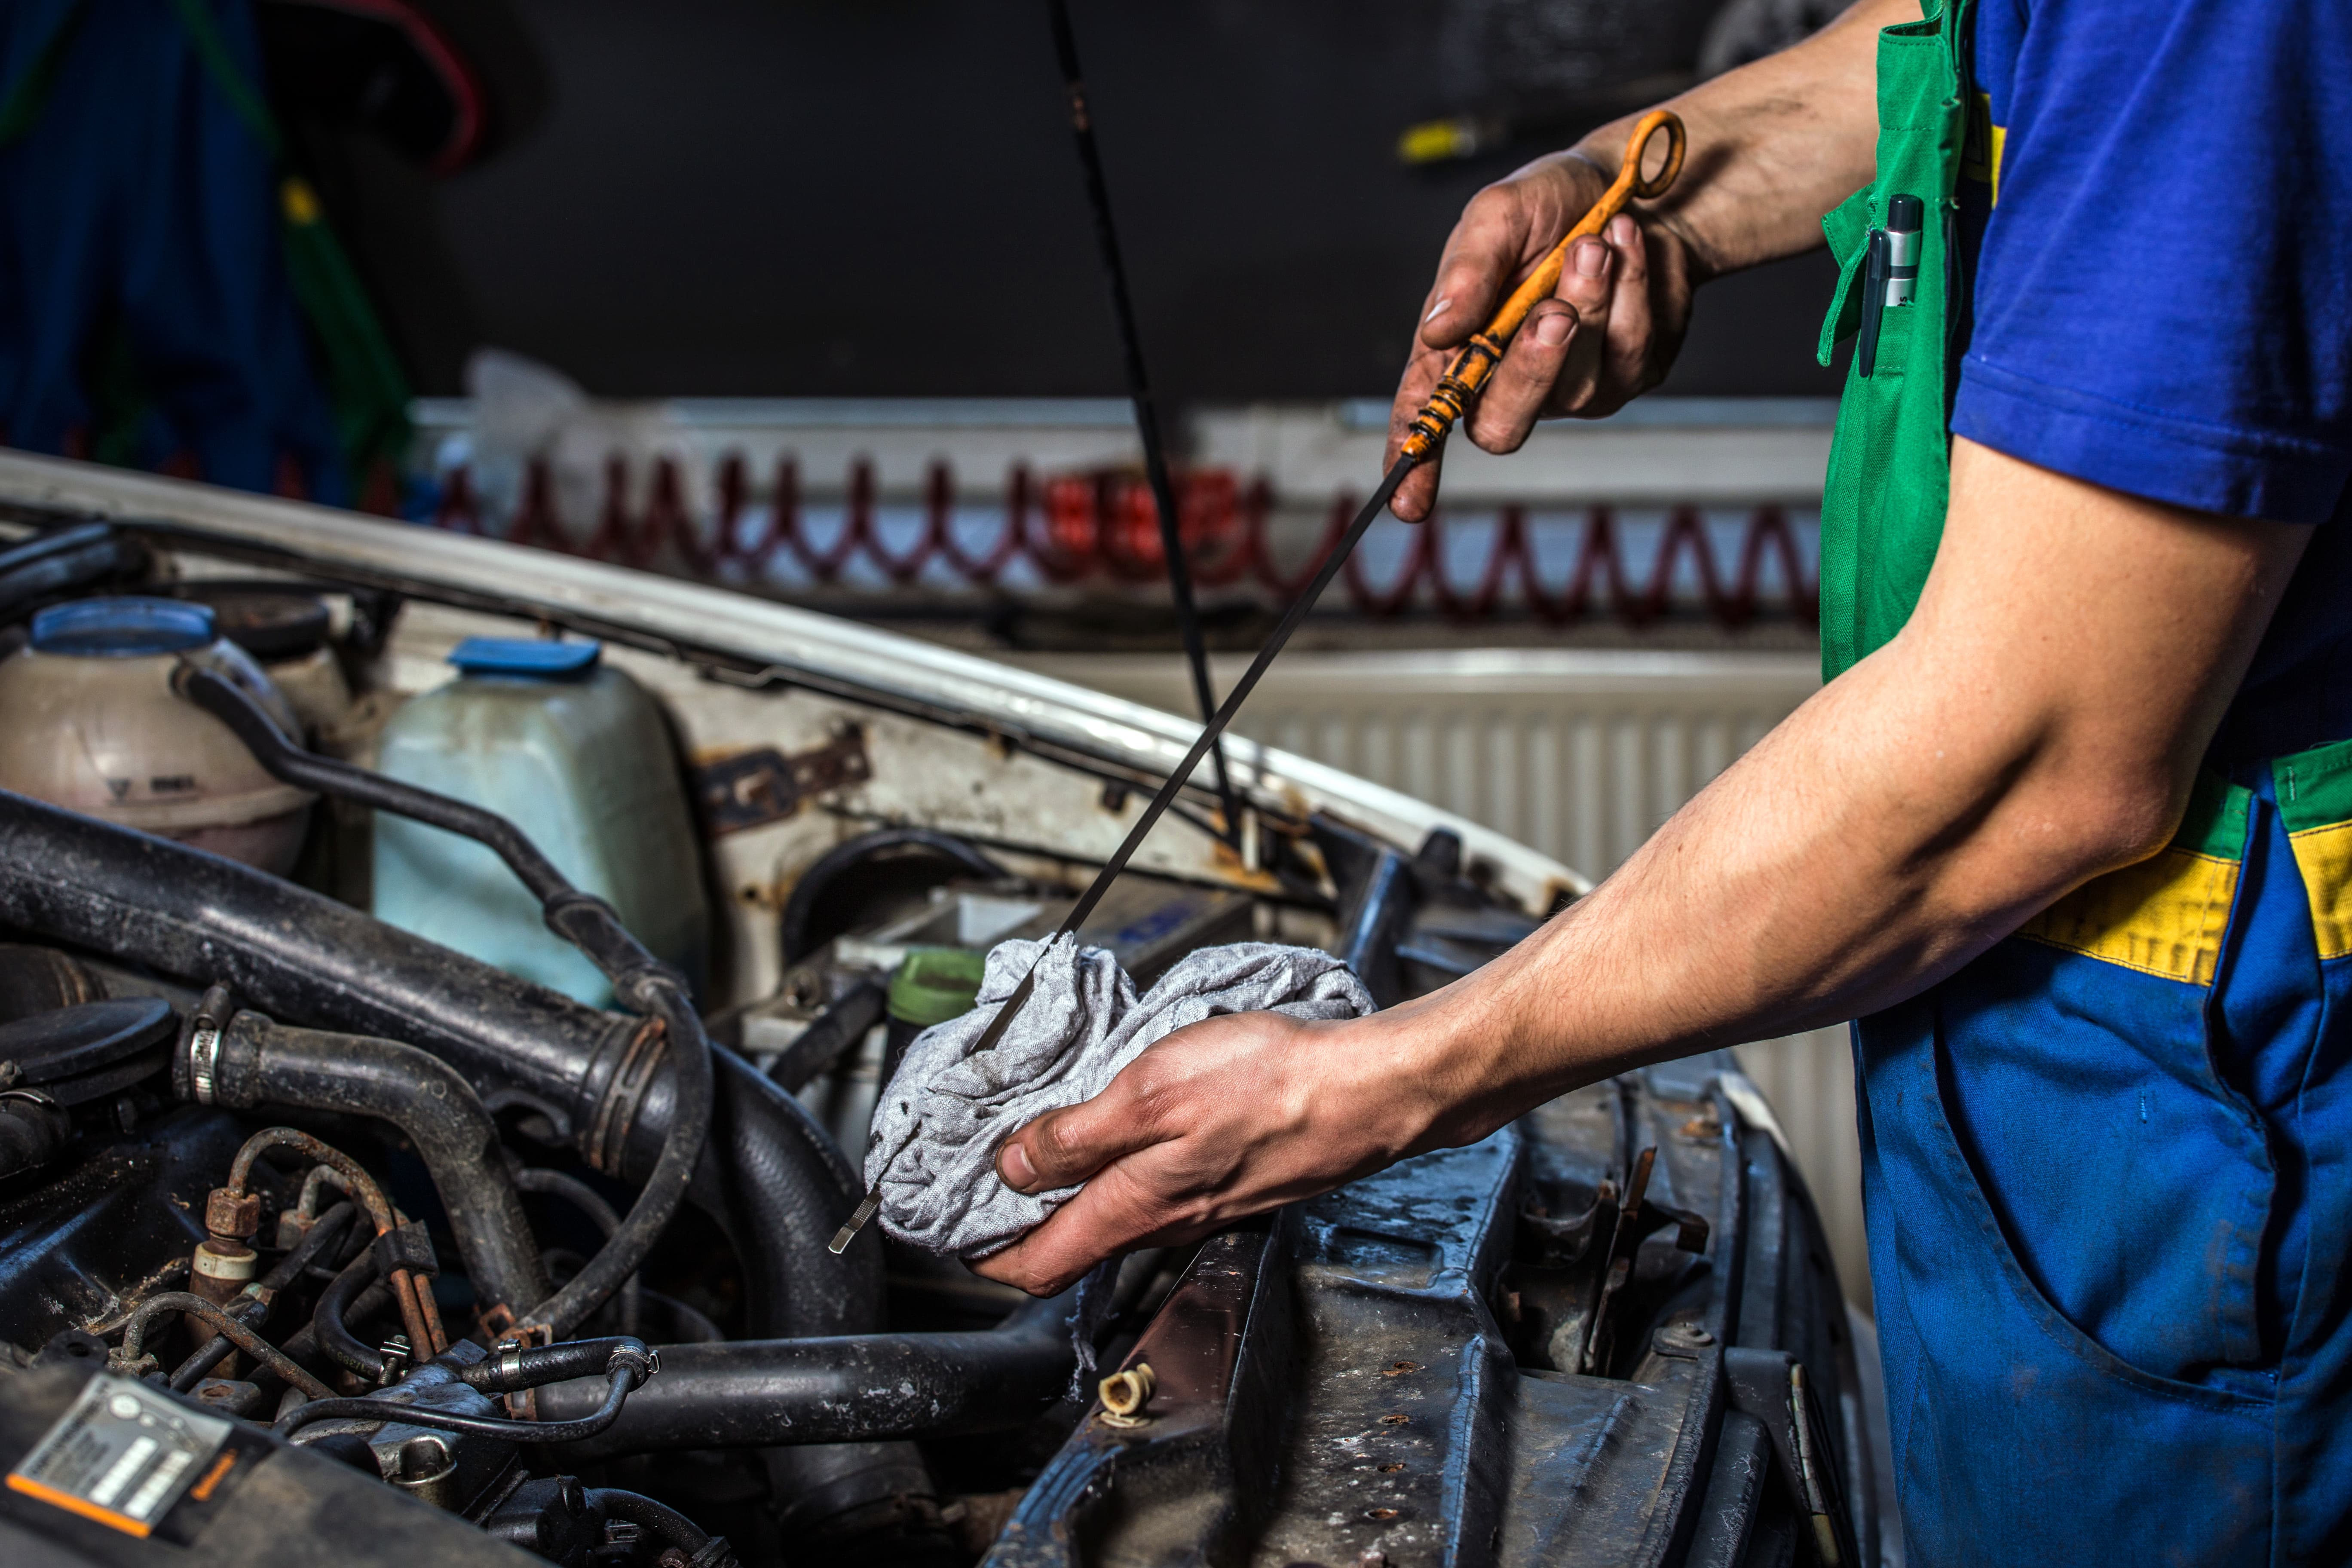 What You Should Know about Oil Change for Auto Repair